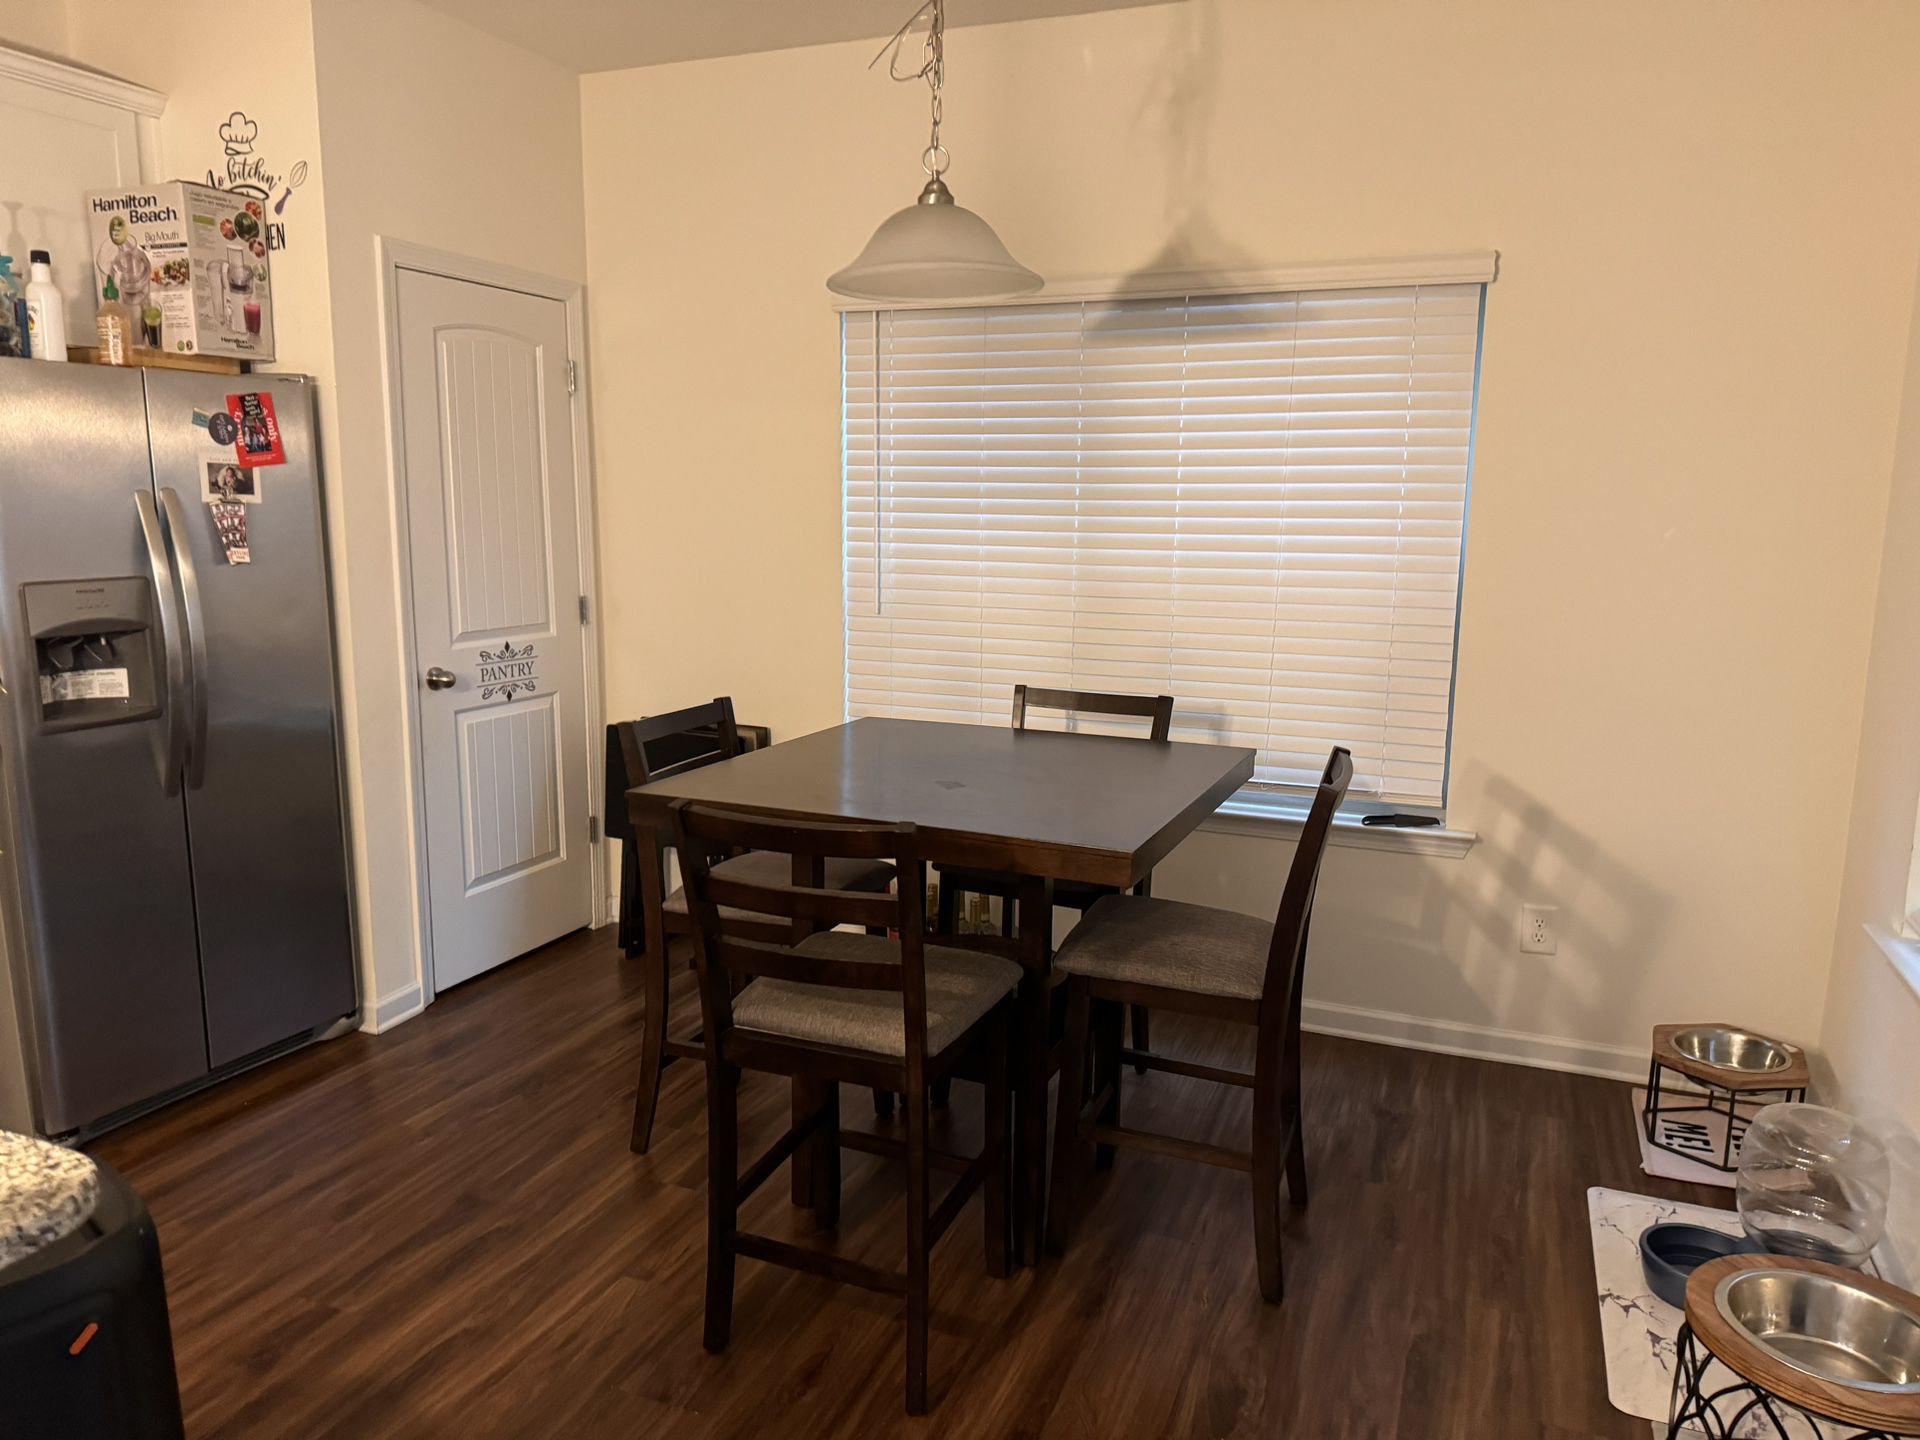 5 Pc Dining Room Table (Best offer wins)